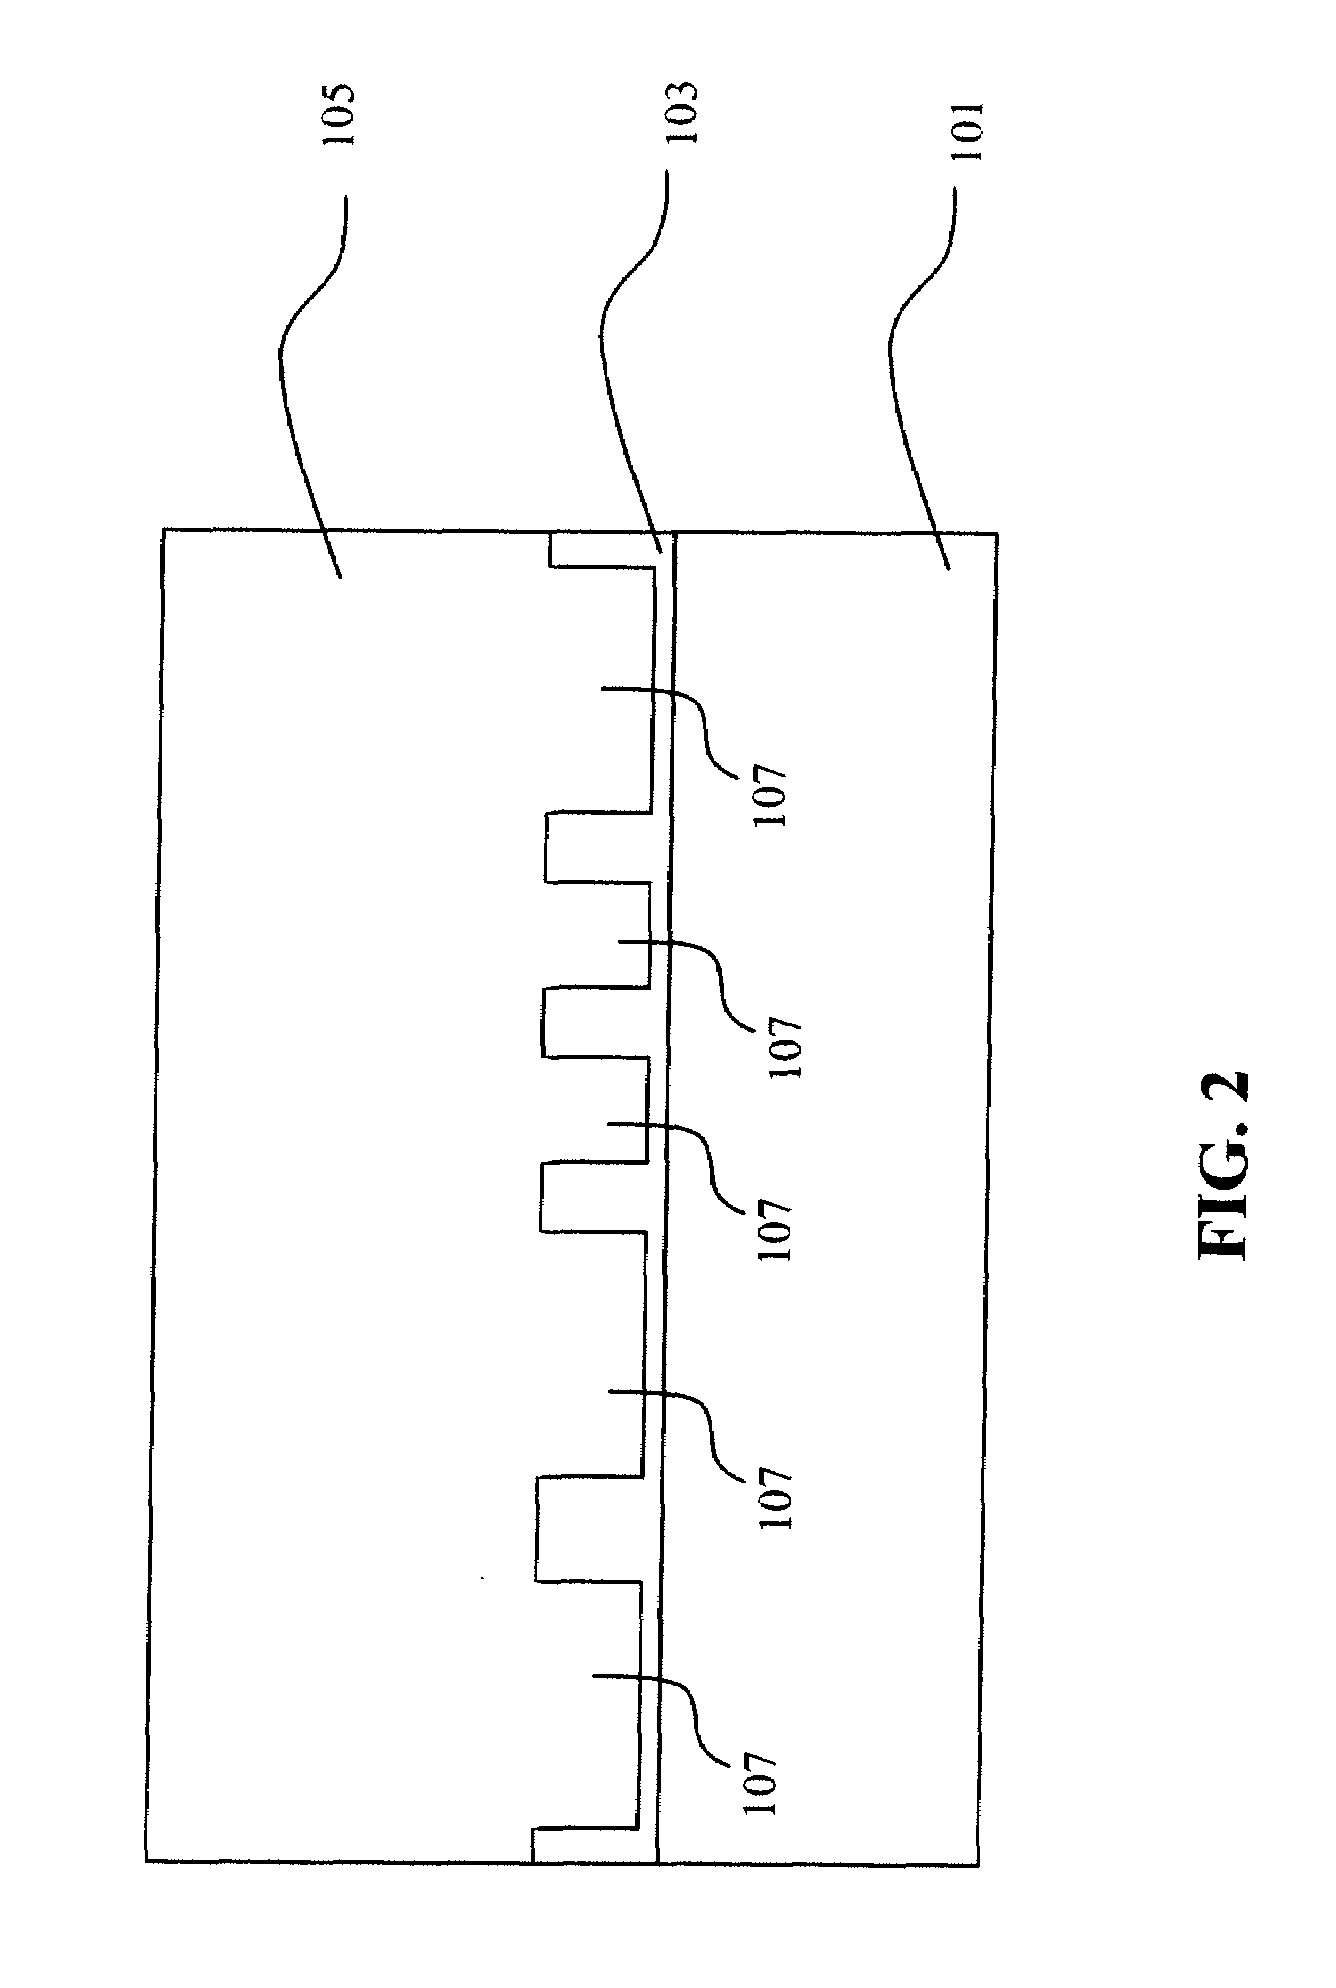 Photoimprintable Low Dielectric Constant Material and Method for Making and Using Same